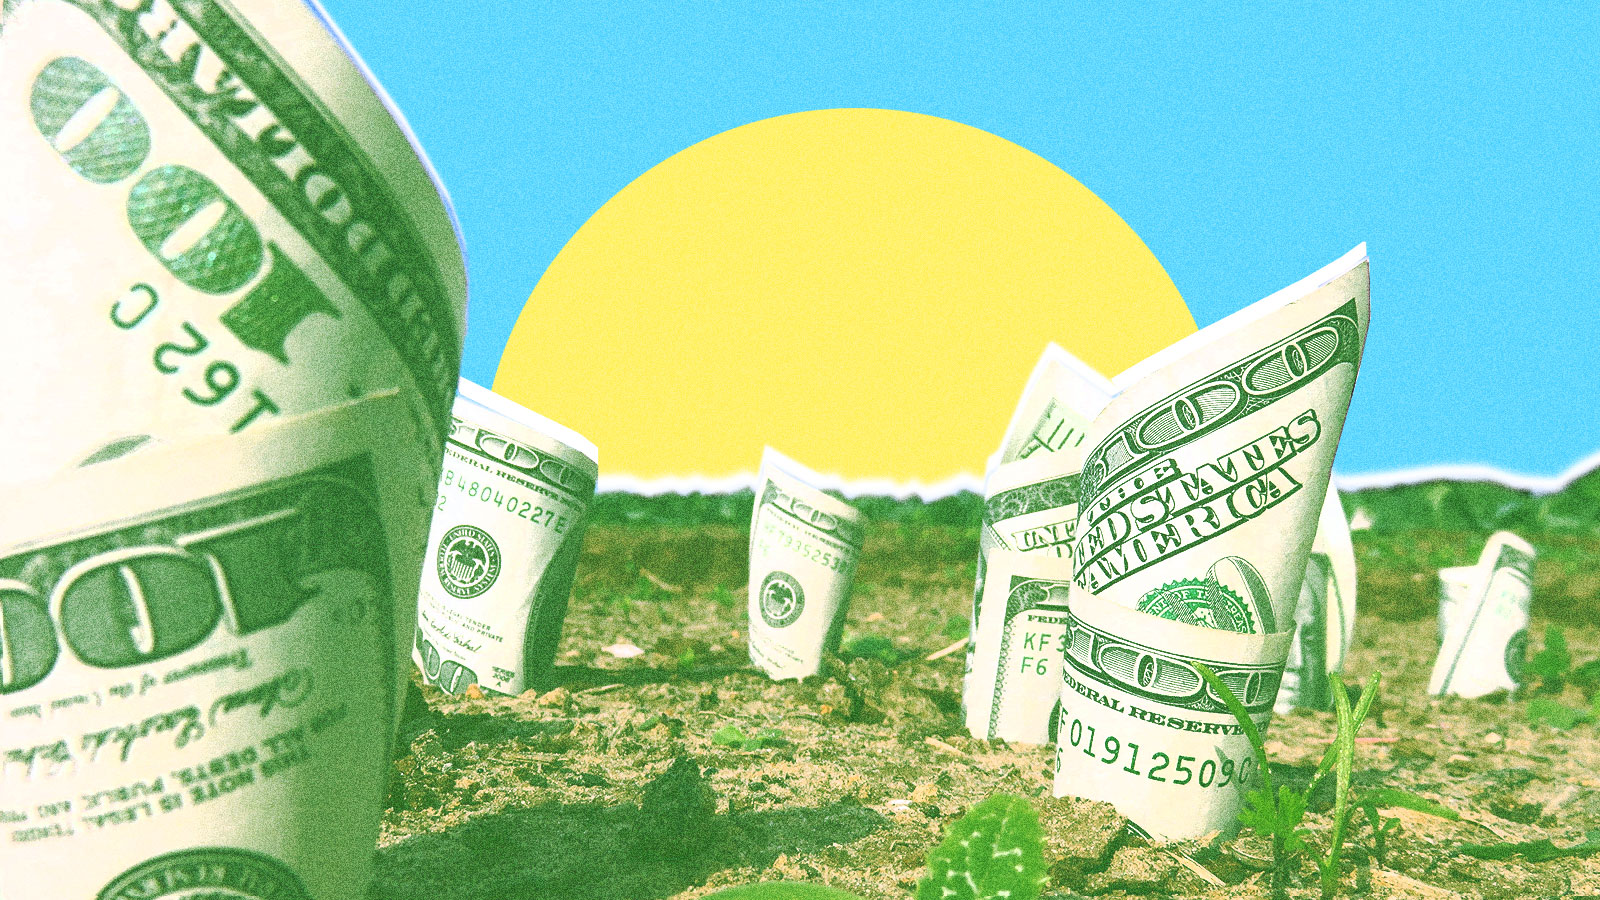 A field with one hundred dollar bills growing out of the ground to represent a green stimulus.